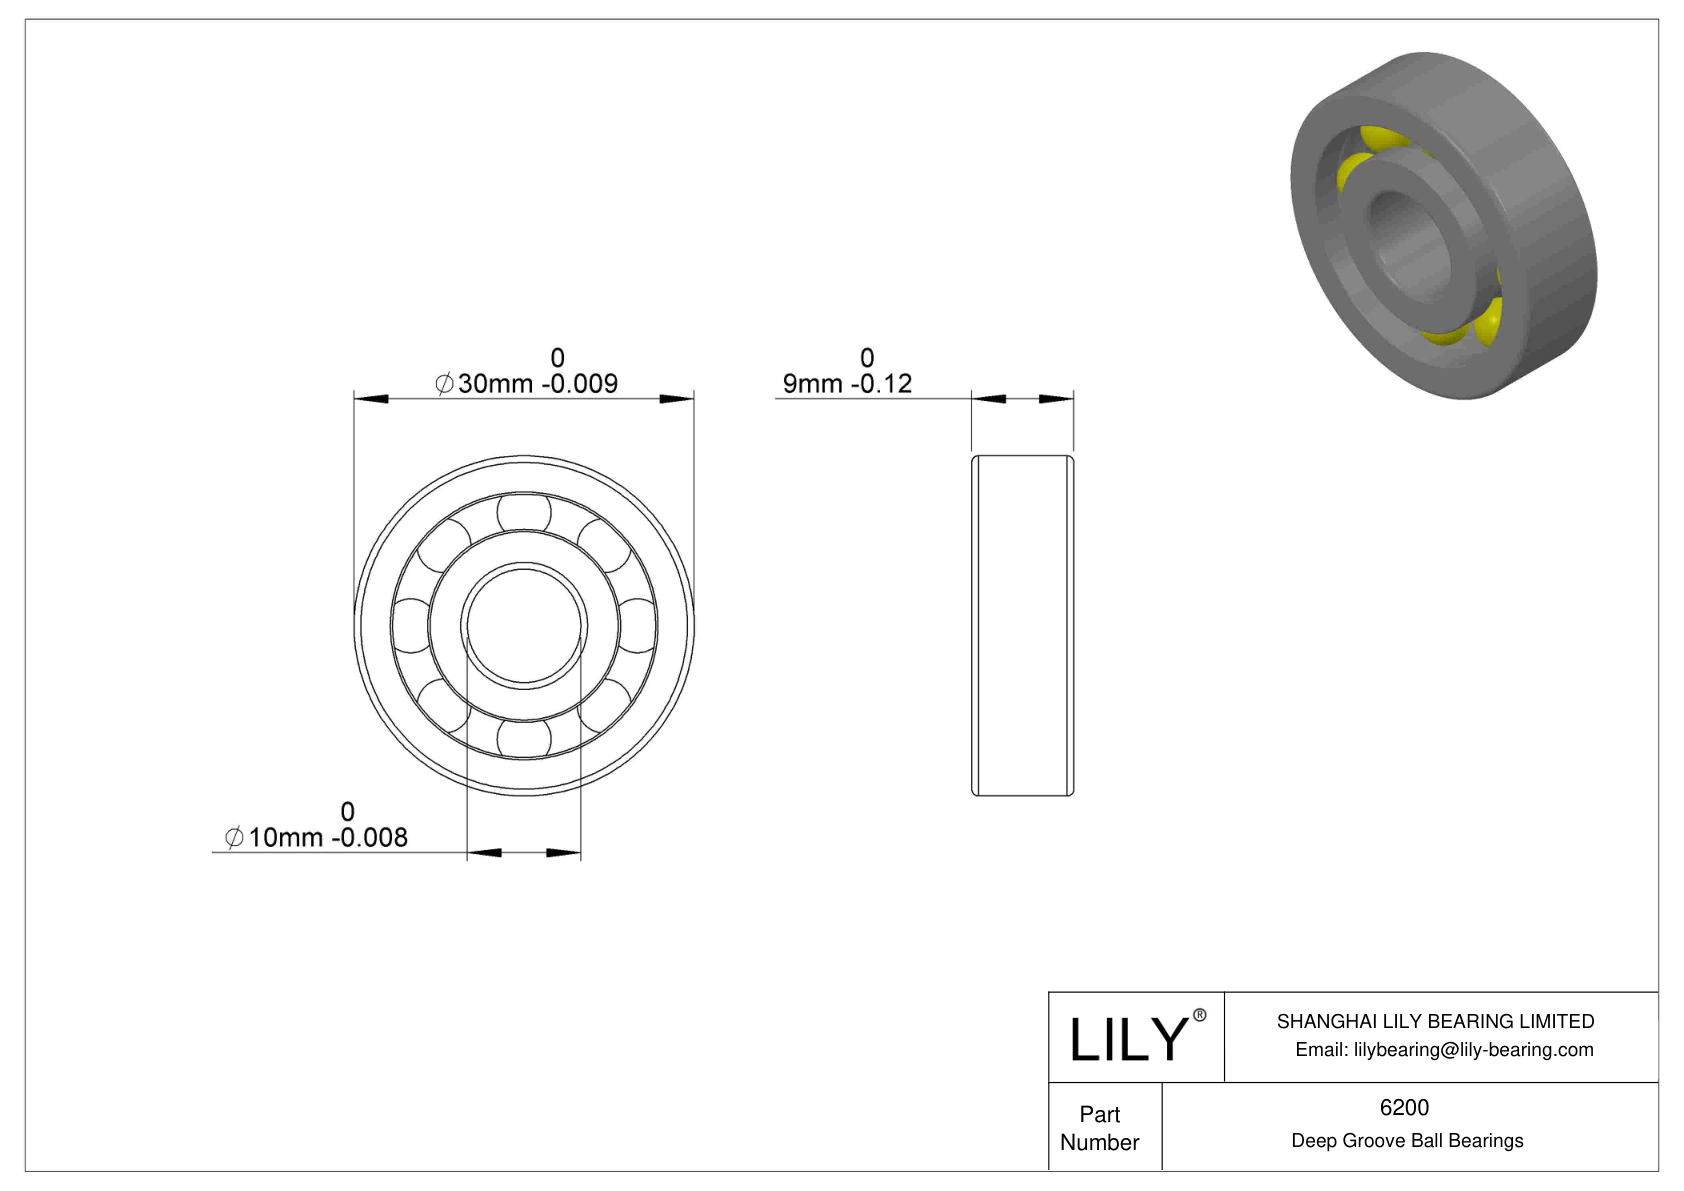 LILY-BS620040-11 POM Coated Bearing cad drawing